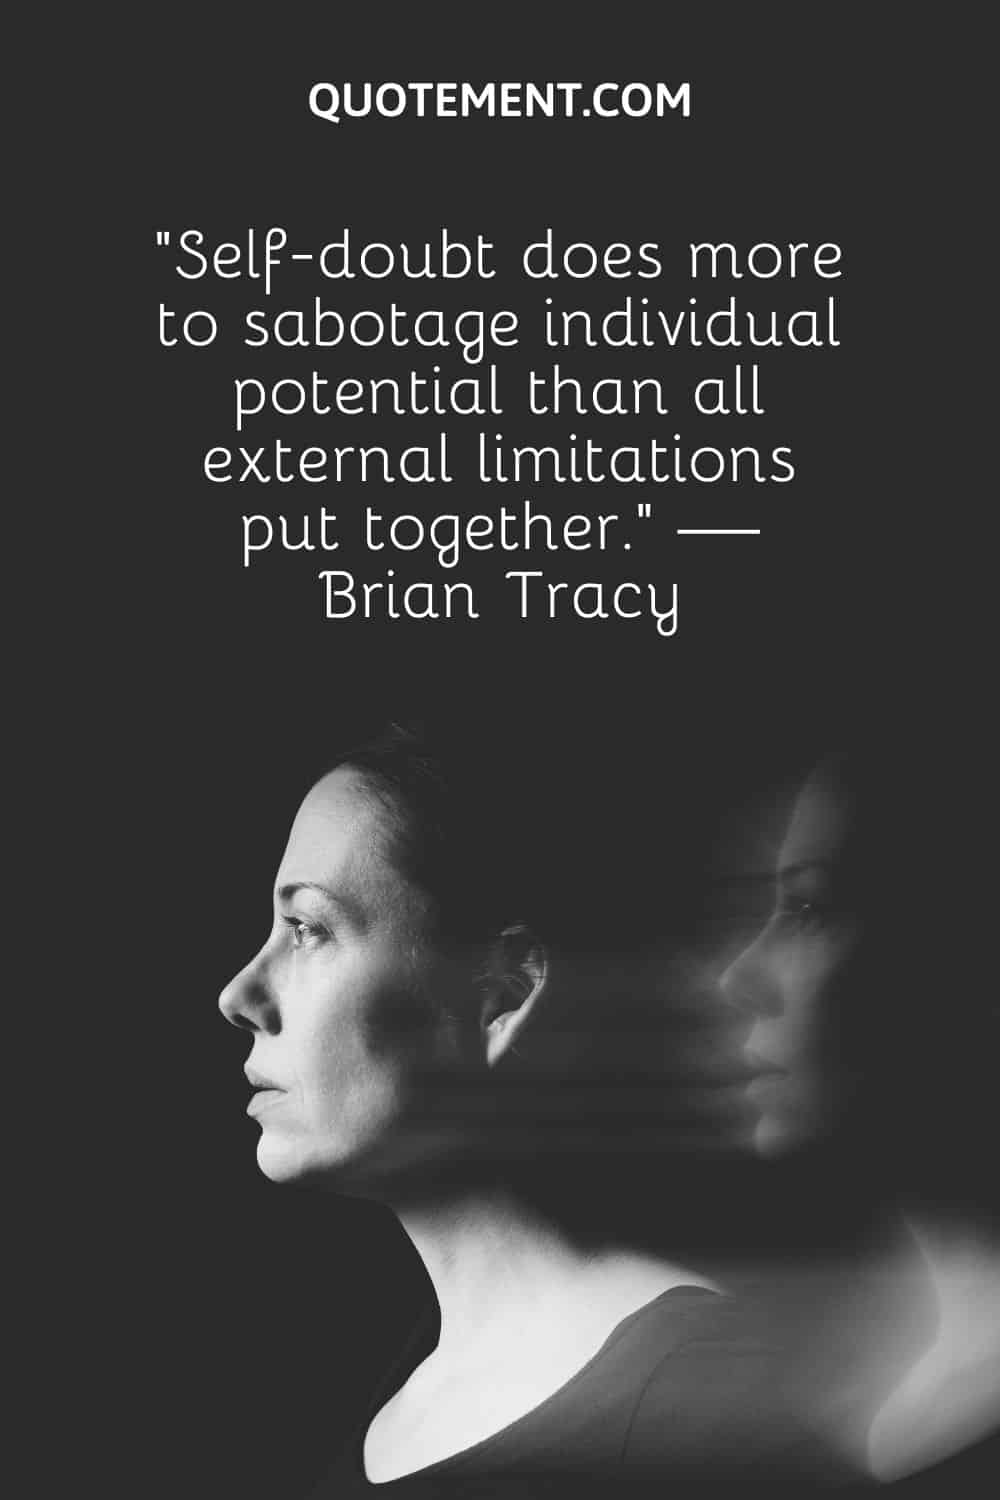 . “Self-doubt does more to sabotage individual potential than all external limitations put together.” — Brian Tracy